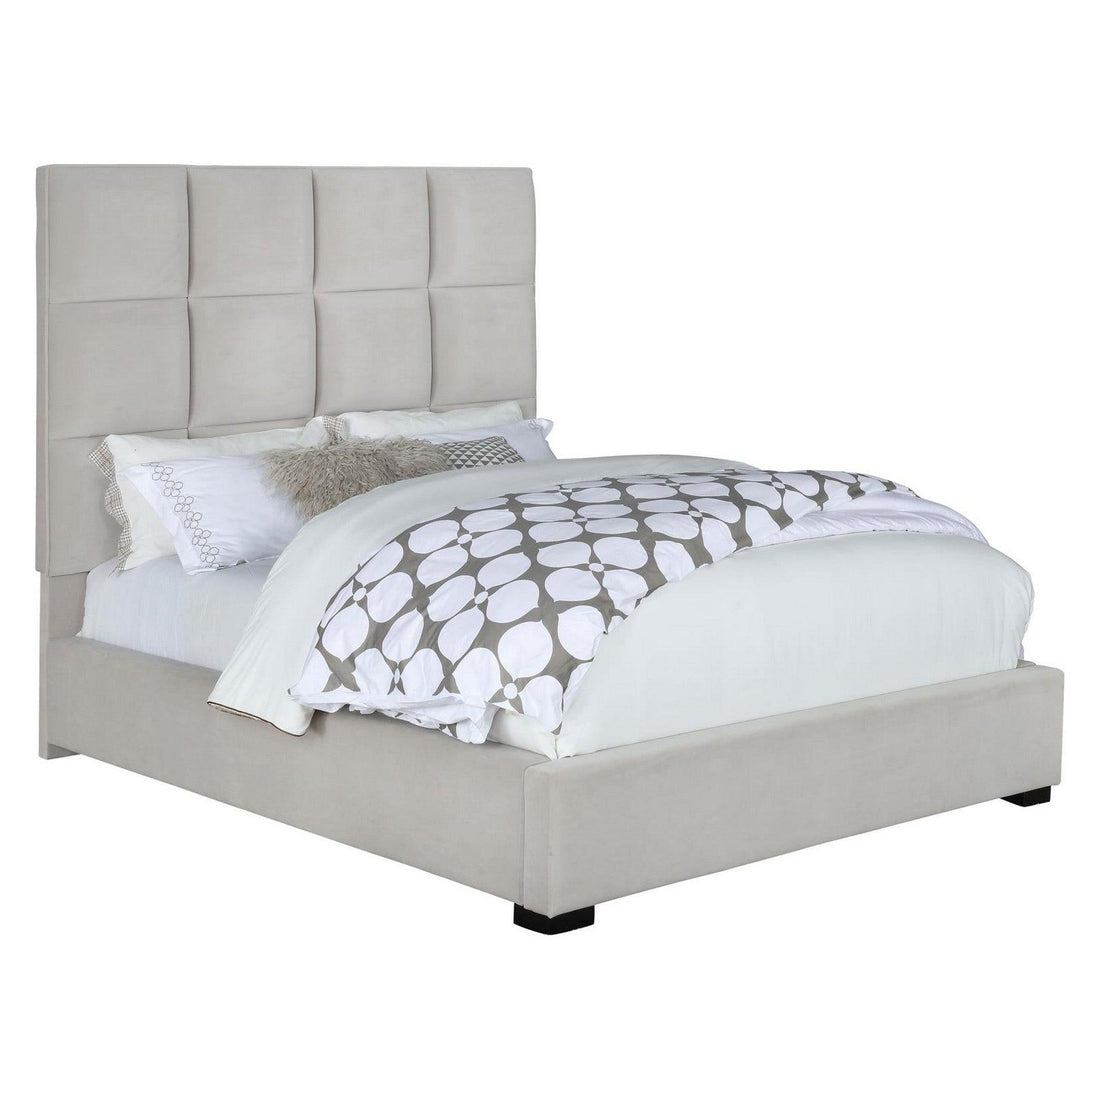 Panes Queen Tufted Upholstered Panel Bed Beige 315850Q